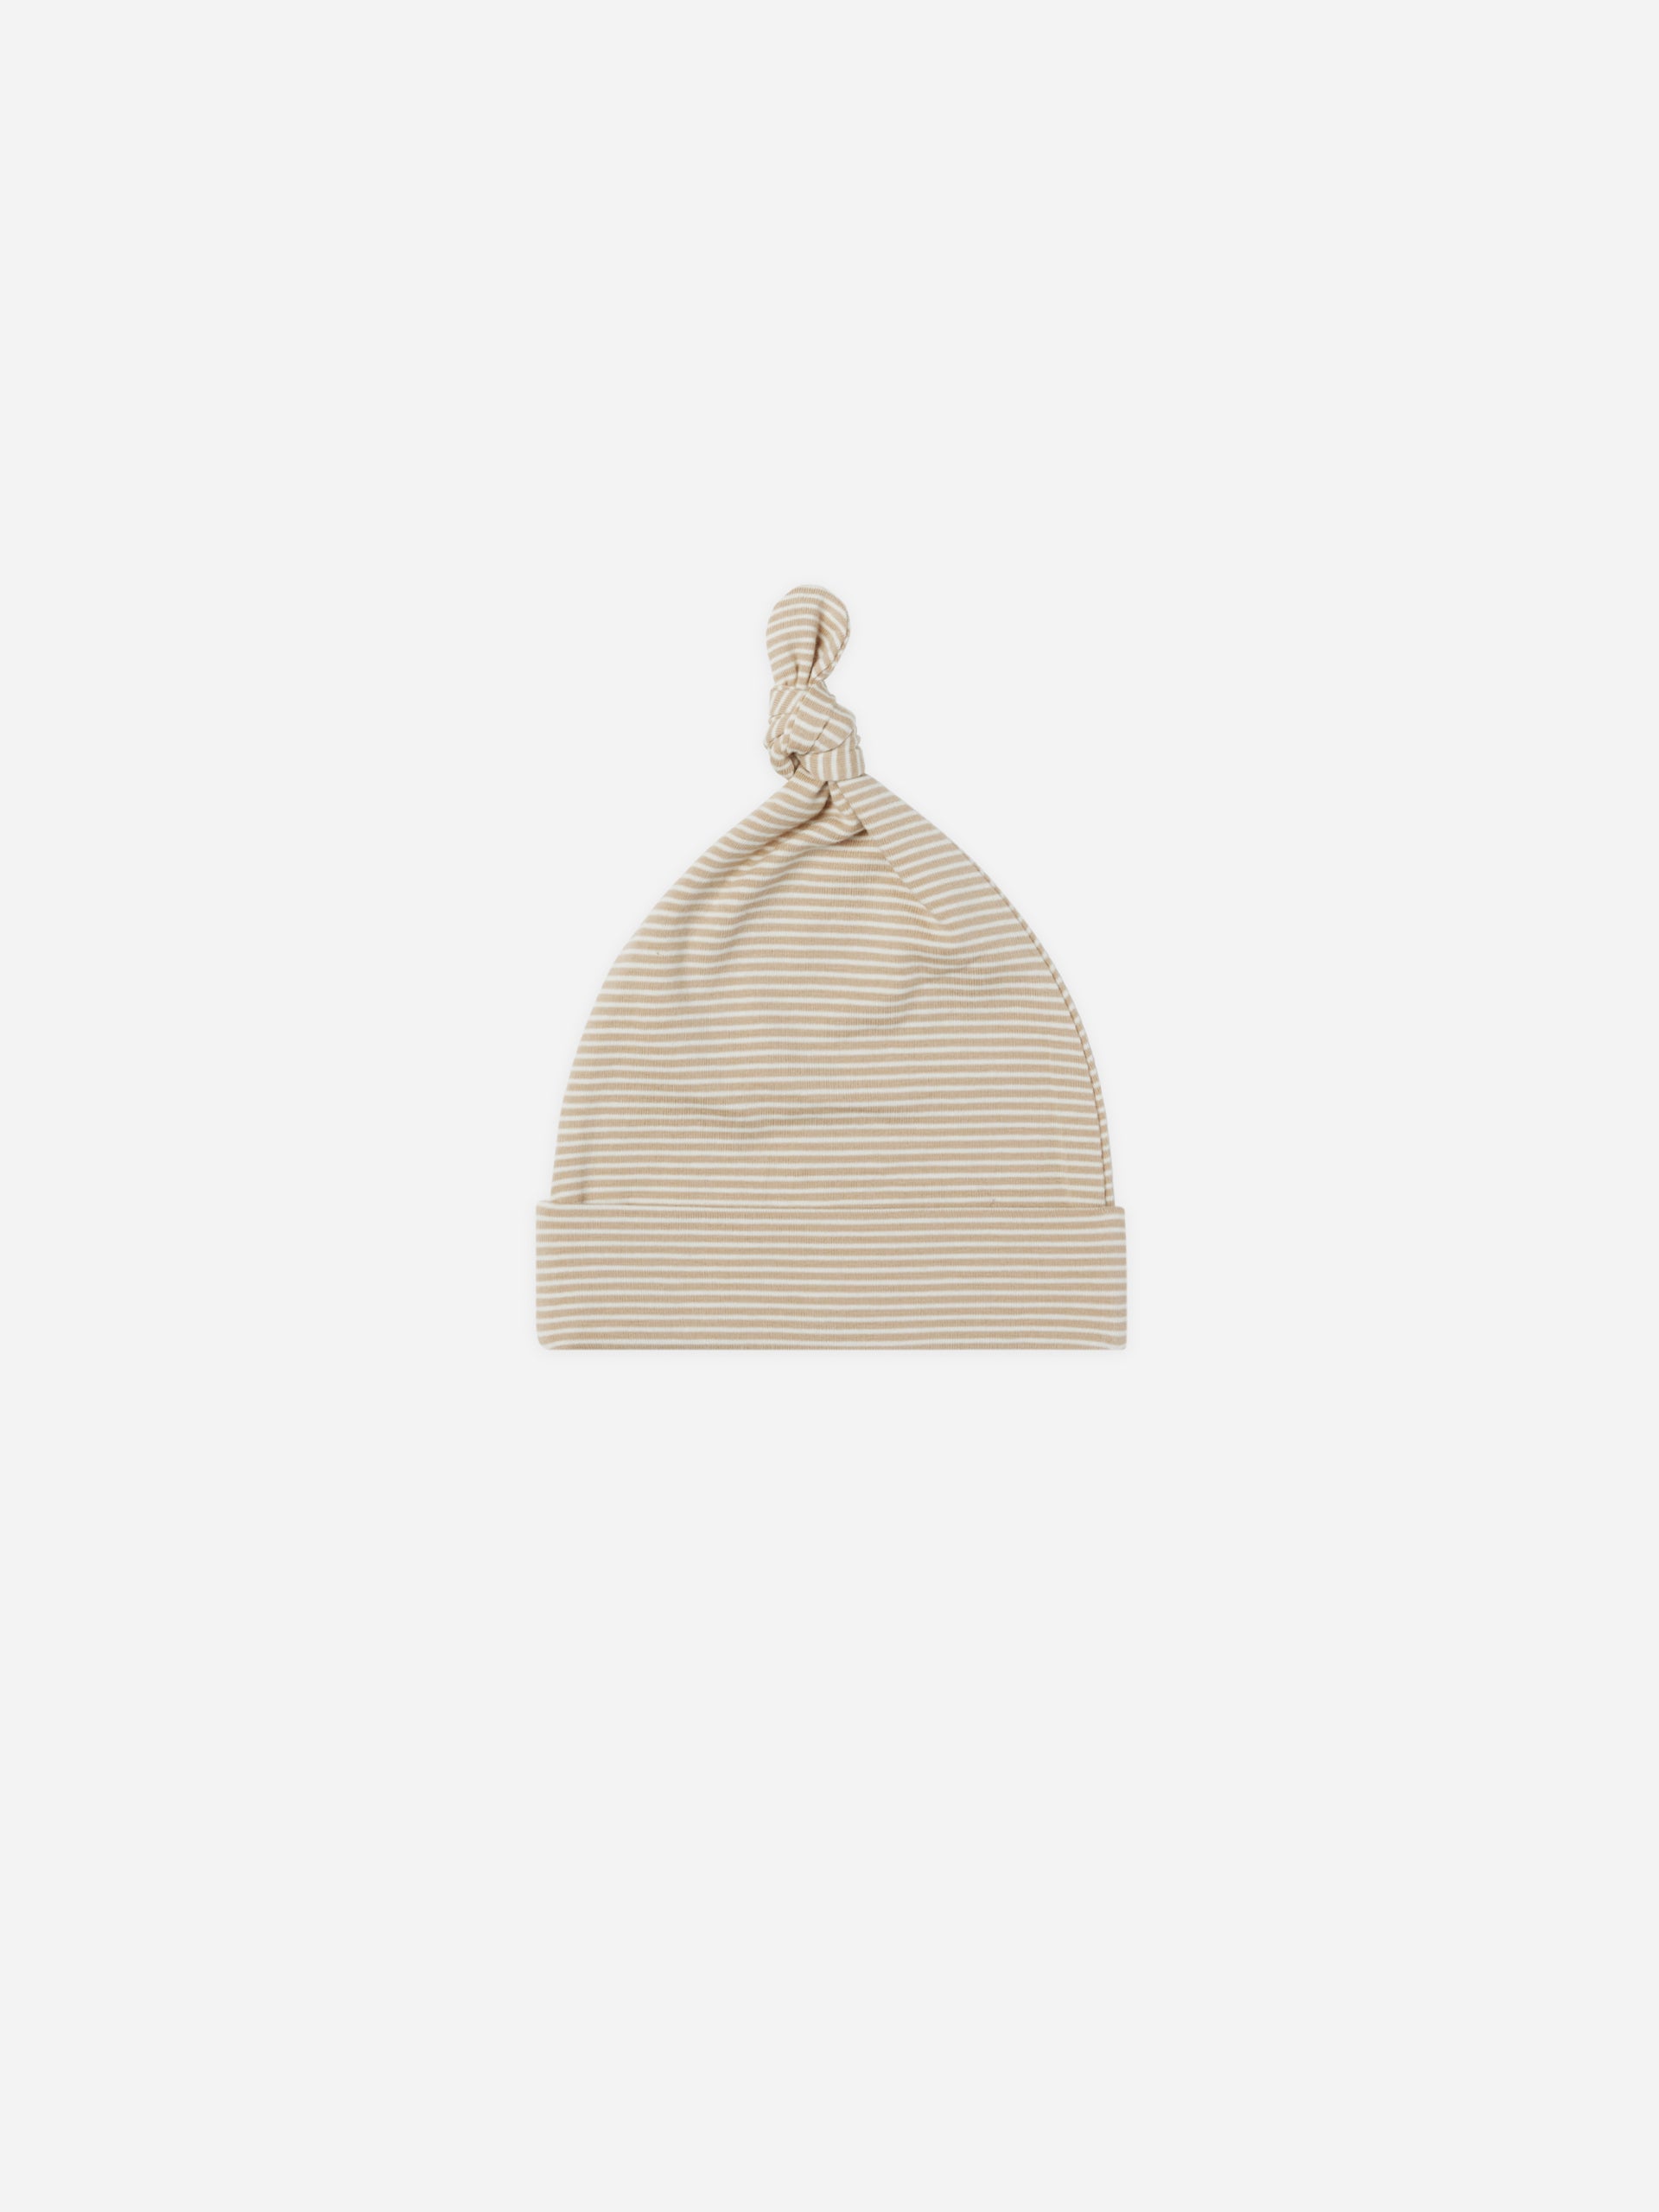 Knotted Baby Hat || Latte Micro Stripe - Rylee + Cru | Kids Clothes | Trendy Baby Clothes | Modern Infant Outfits |